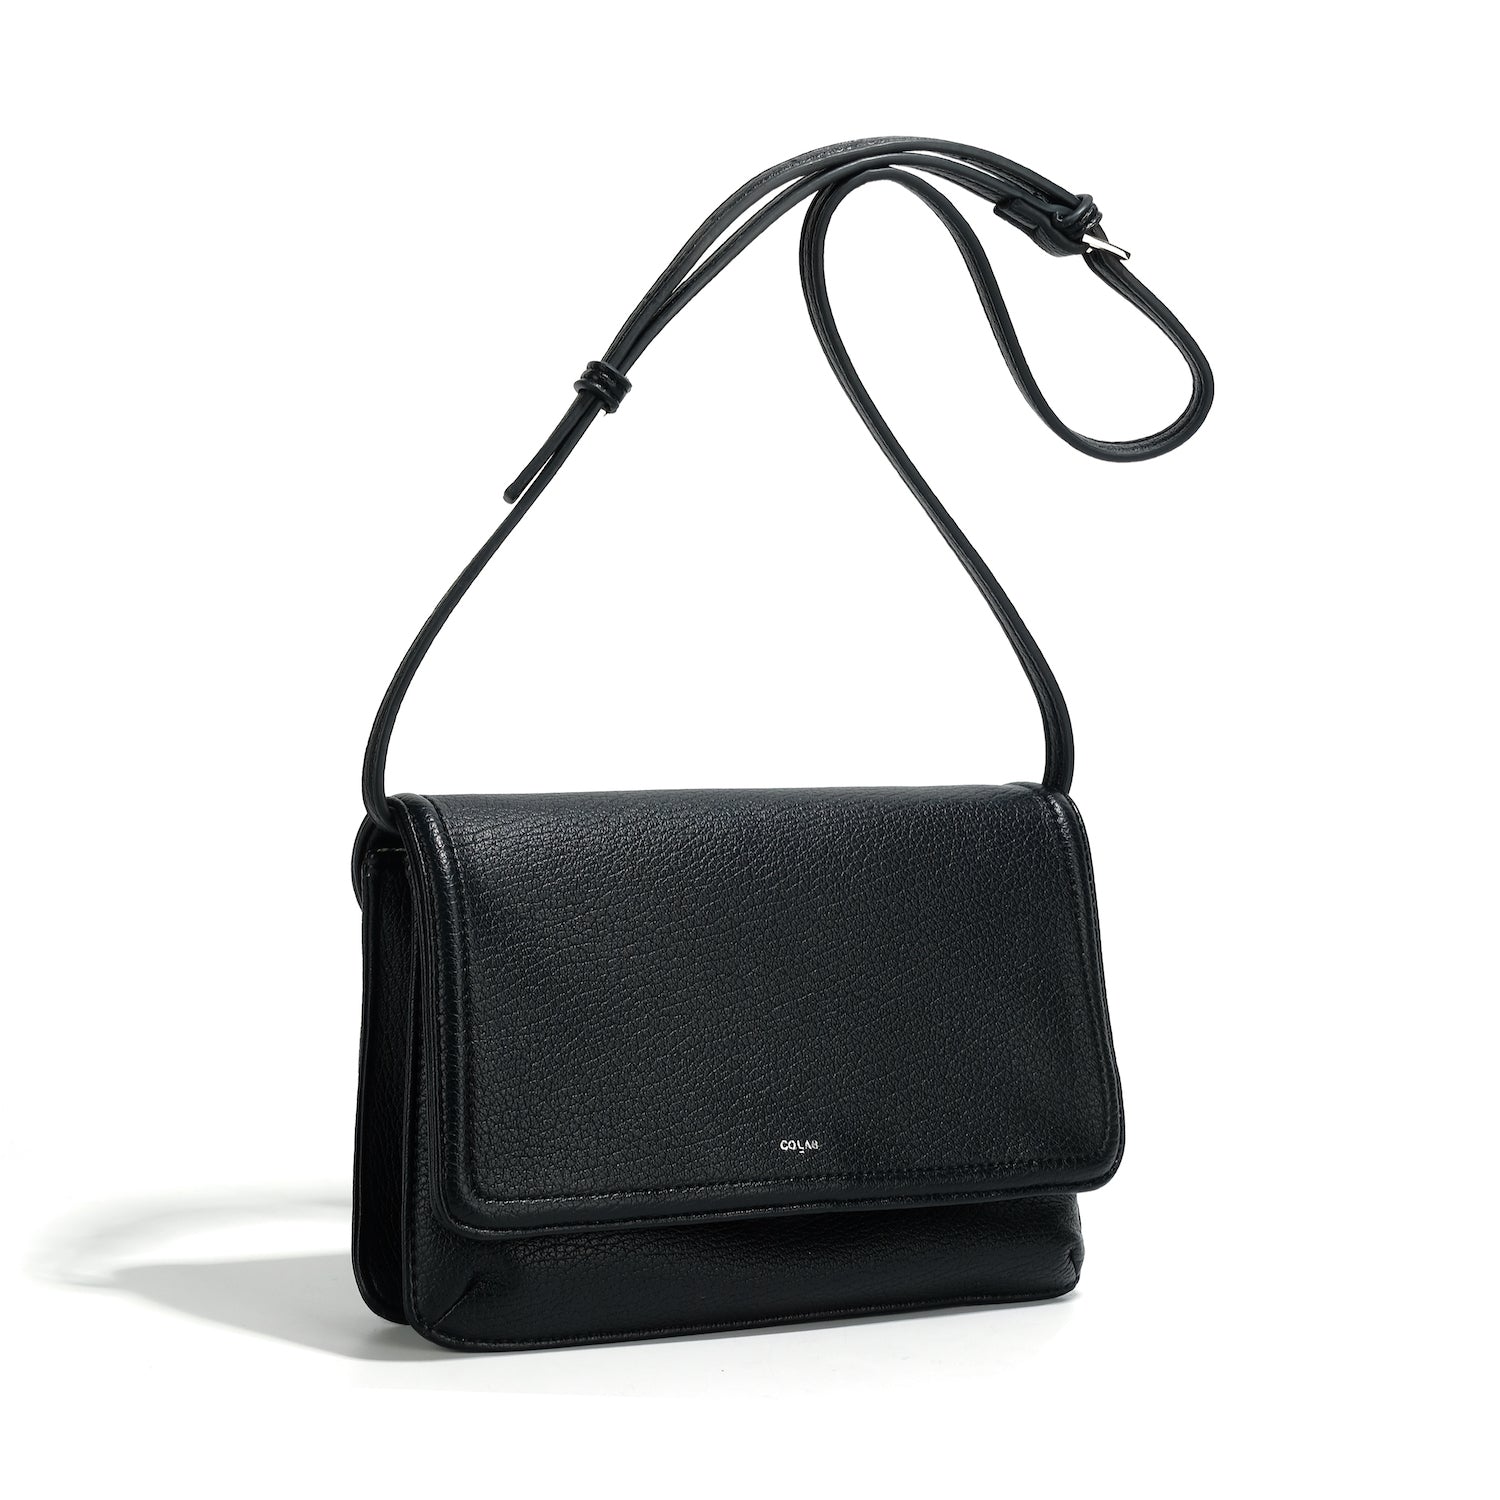 co-lab Vega Clutch/Crossbody - Black Accessories - Other Accessories - Handbags & Wallets by co-lab | Grace the Boutique